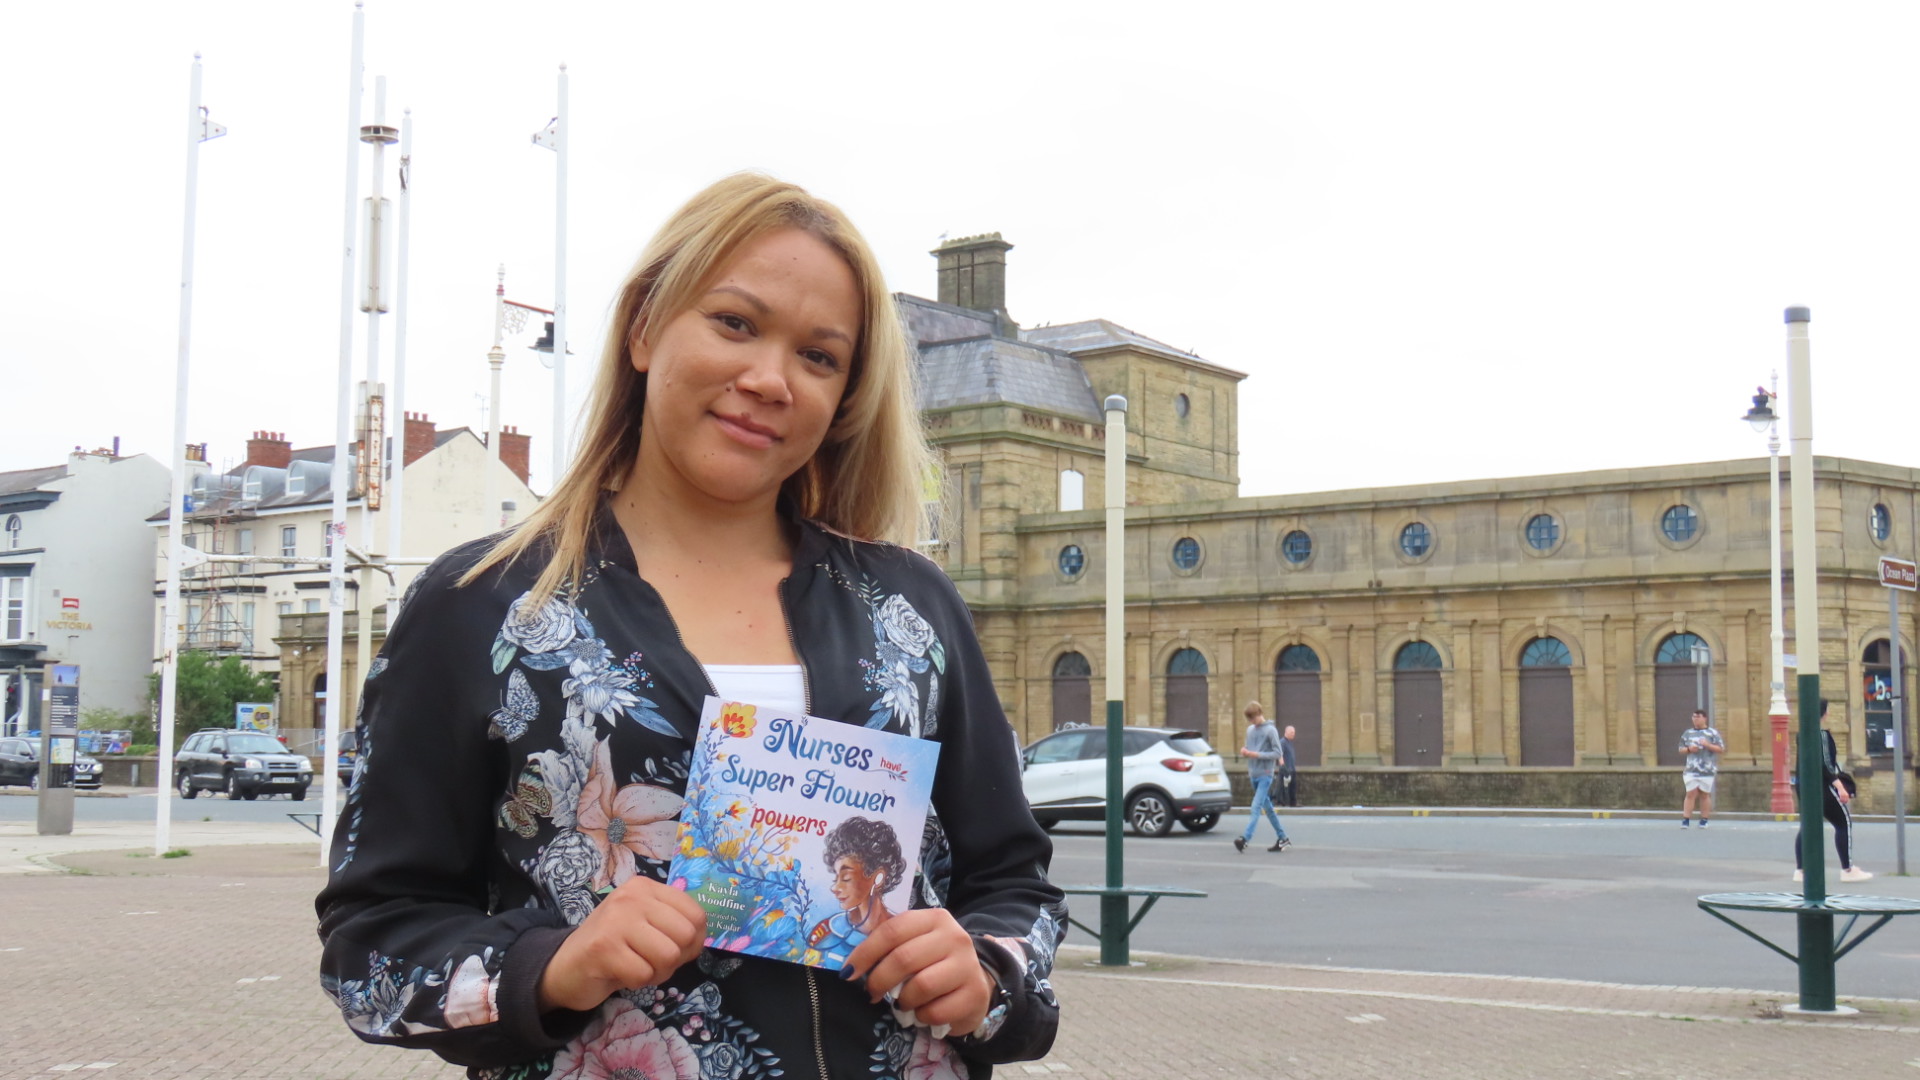 Author Kayla Woodfine has written the book Nurses Have Super Flower Powers. Photo by Andrew Brown Stand Up For Southport